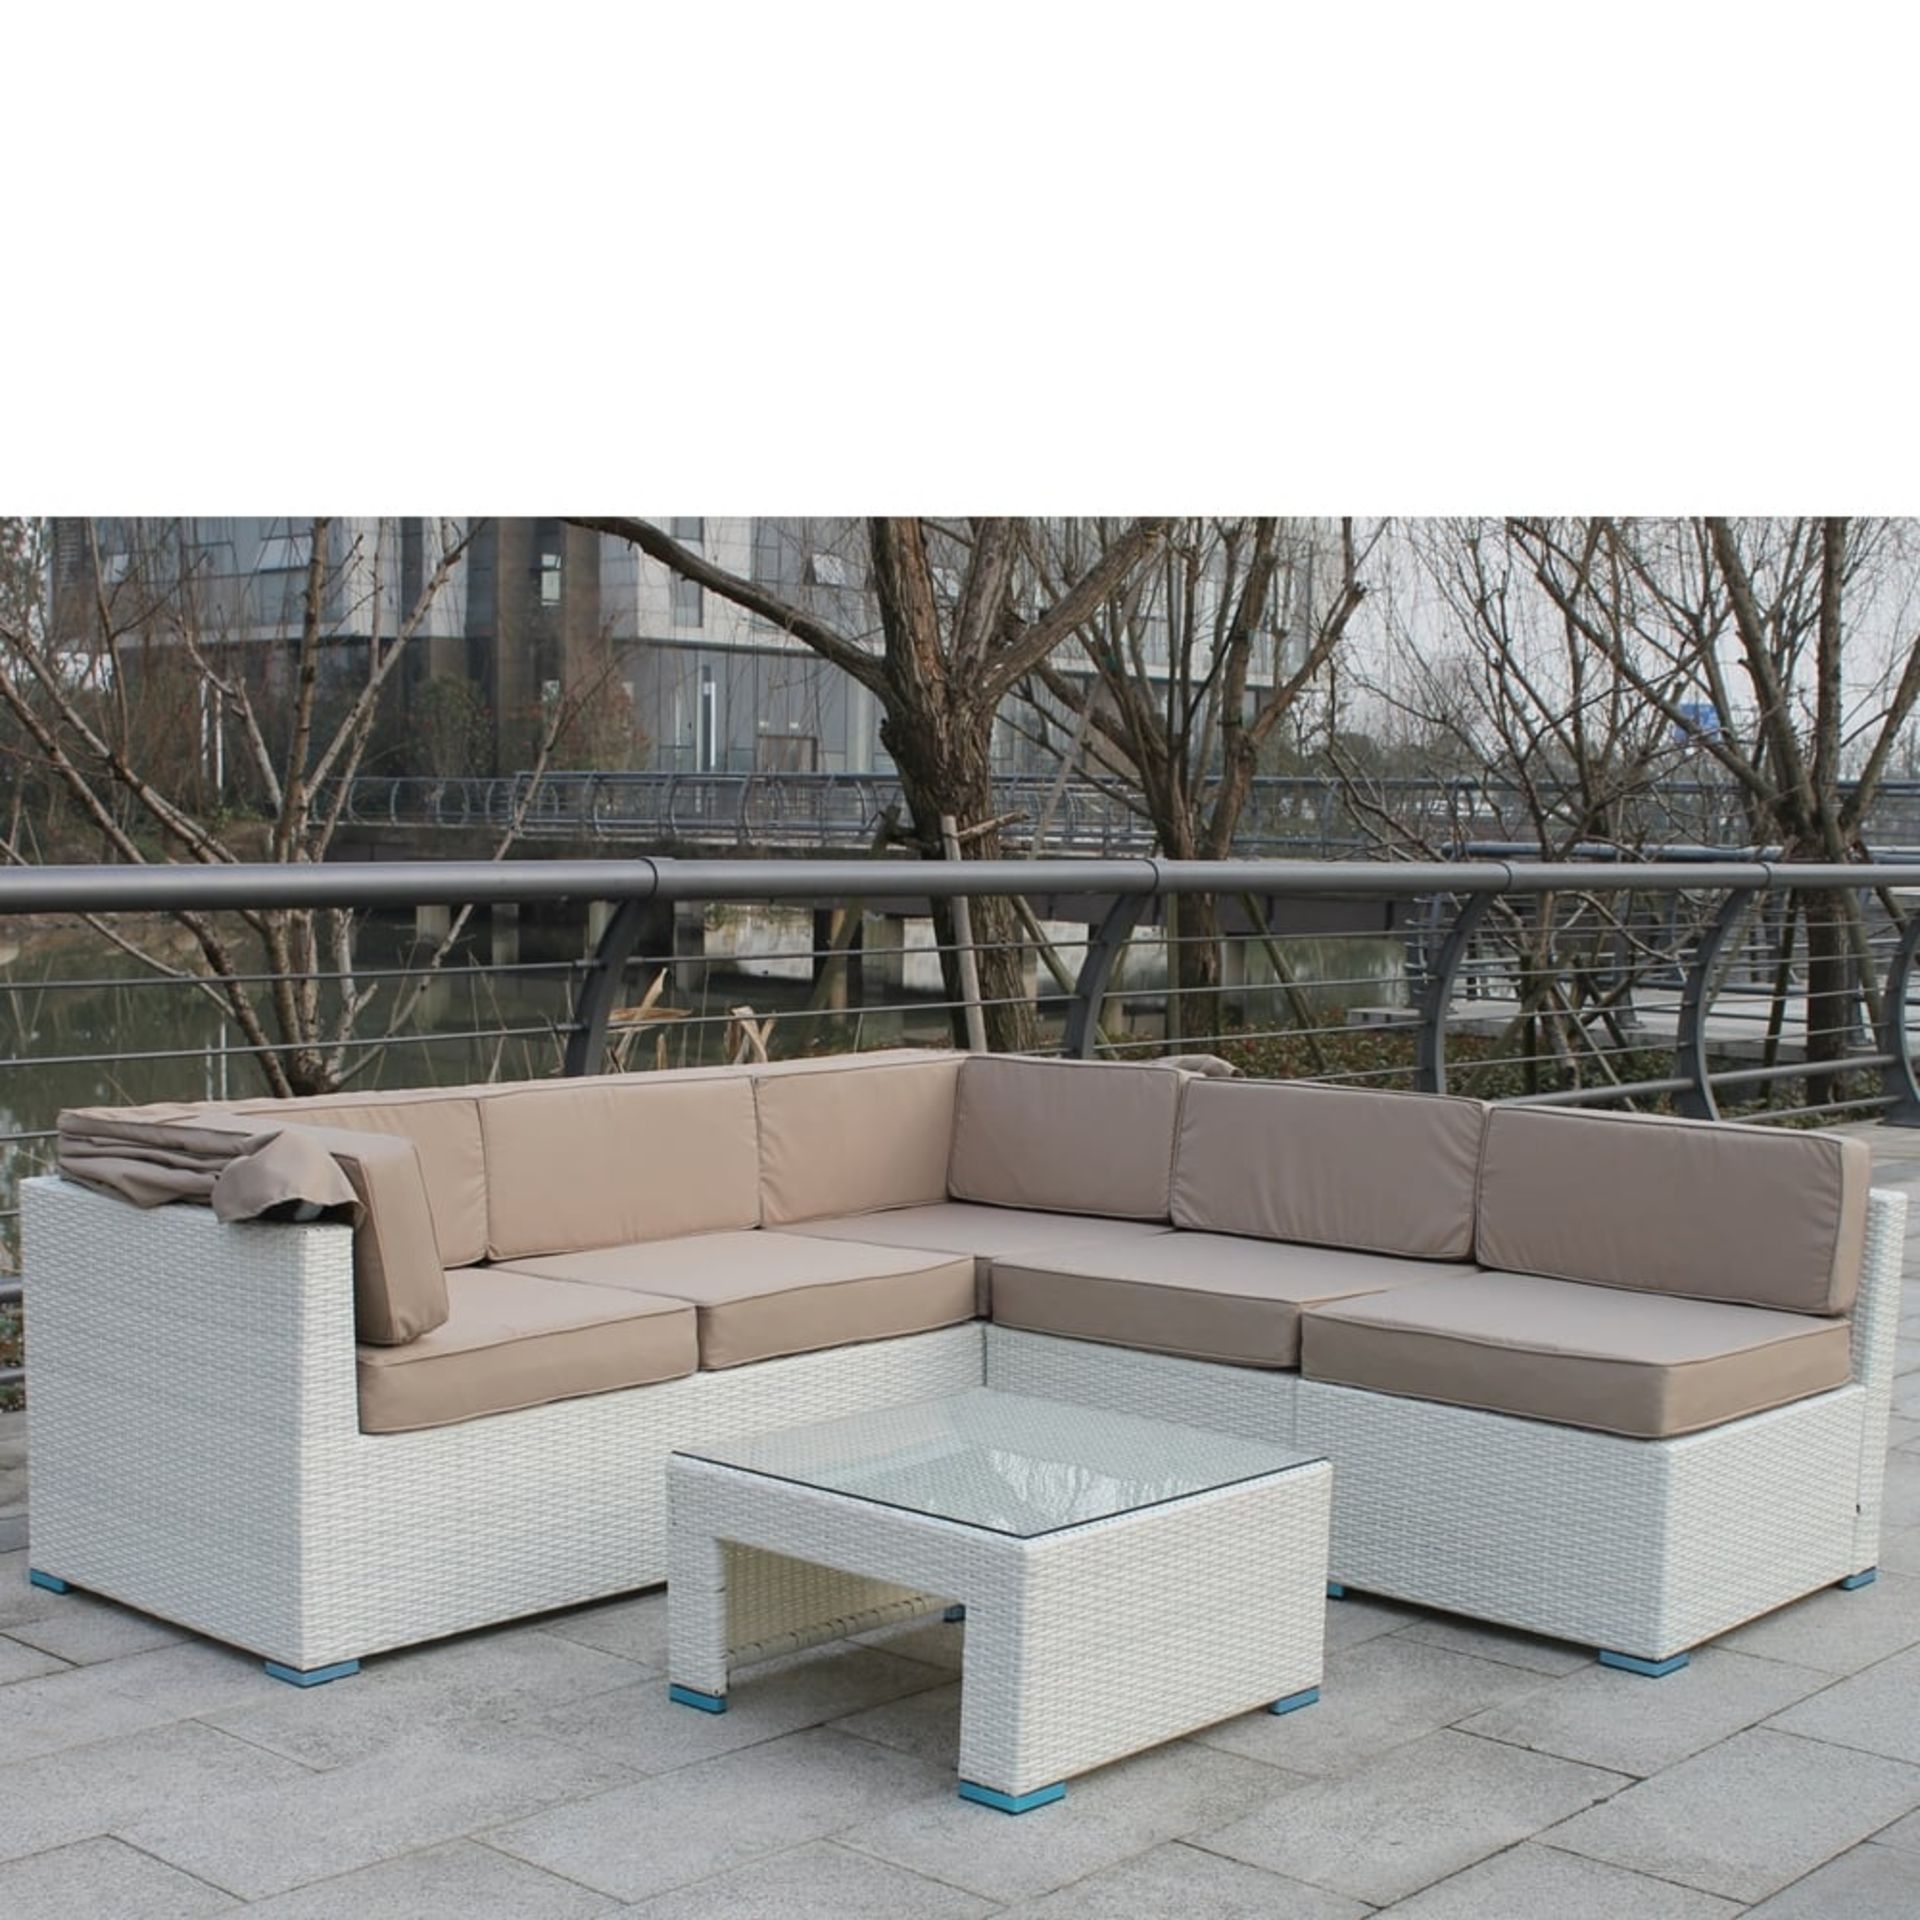 Altrincham Five Seat Rattan Sofa Set with Table new and boxed white pu rattan. - Image 2 of 3